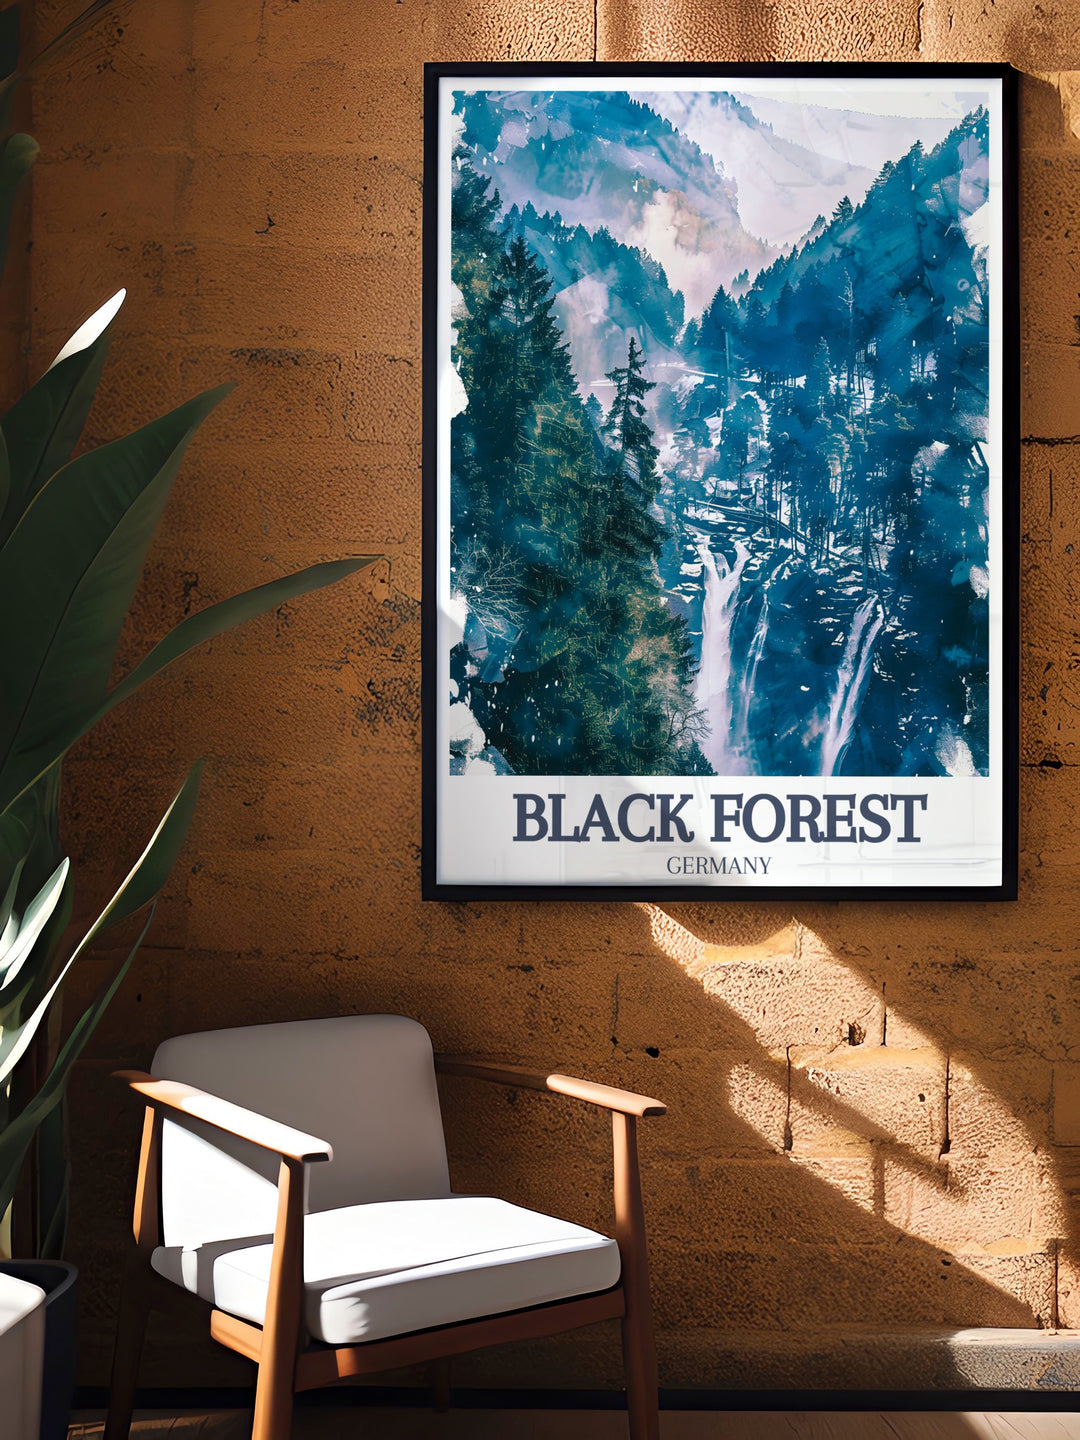 Discover the serene charm of Triberg Waterfalls, Baden Wurttemberg with this exquisite Schwarzwald Poster a perfect addition to any home decor offering a window into the enchanting Black Forest landscape ideal for those who appreciate the tranquility of Germanys natural wonders